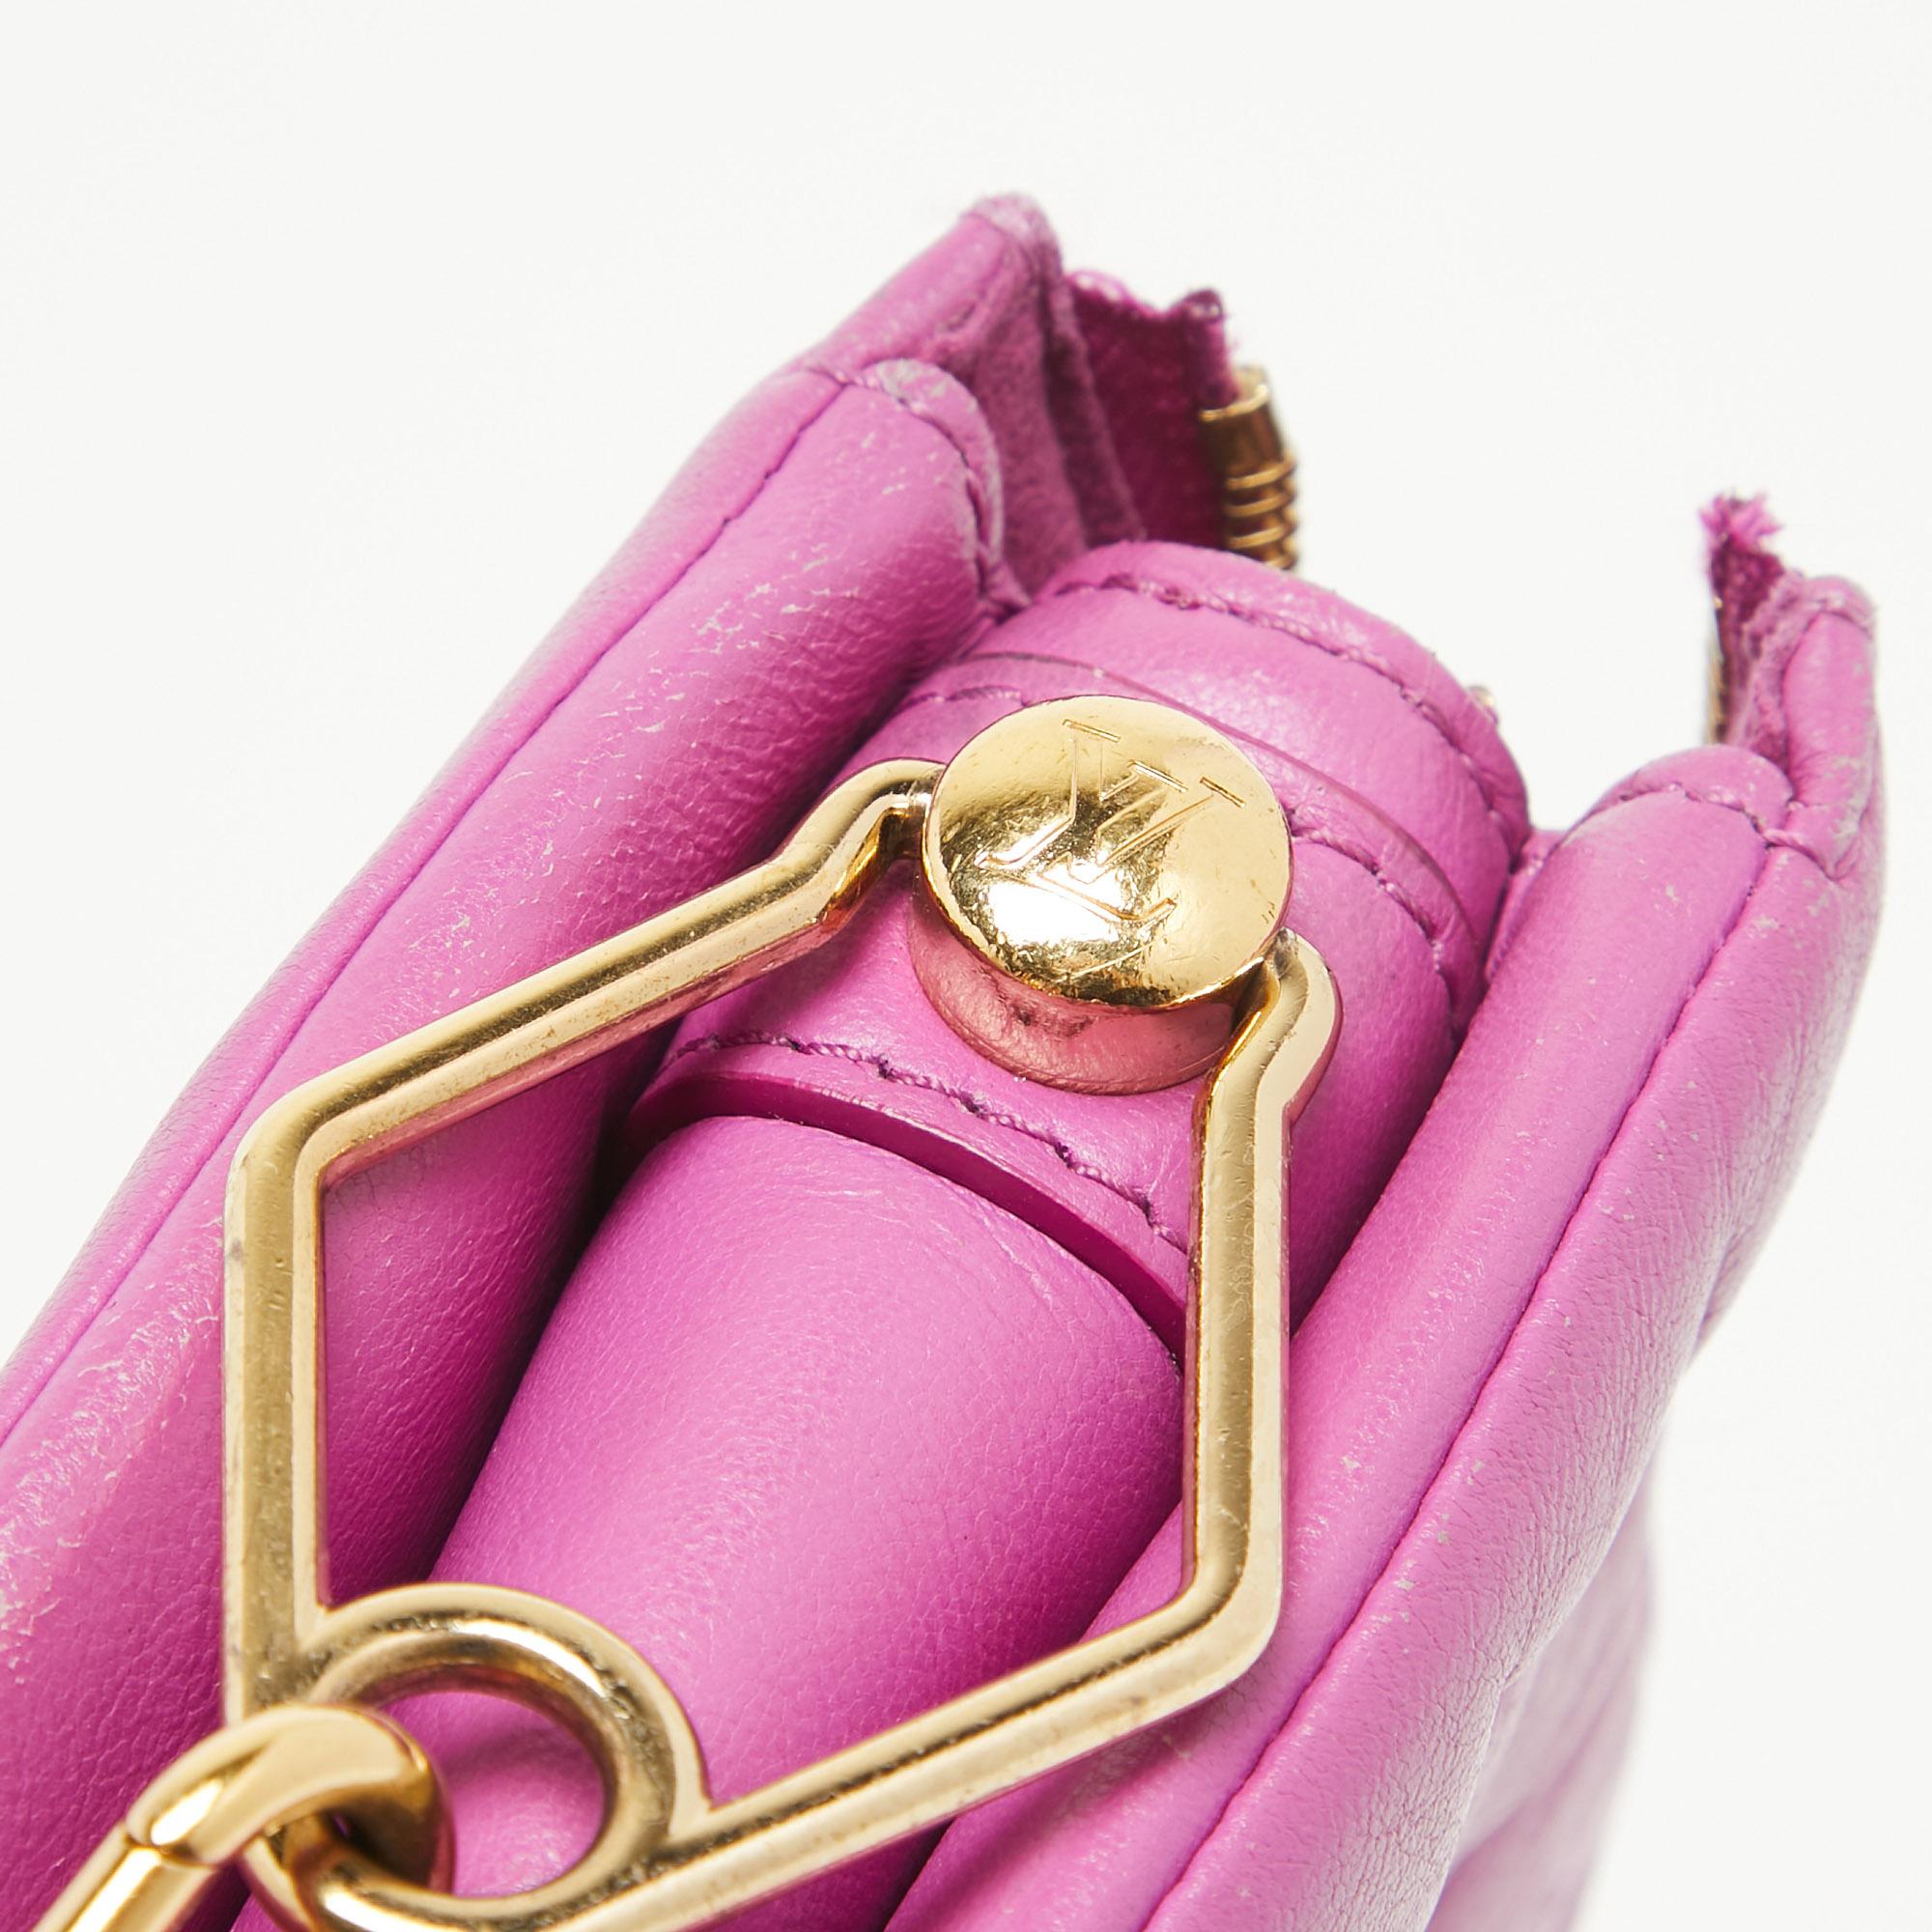 Louis Vuitton Orchid Monogram Embossed Puffy Leather Coussin BB Bag For Sale 13